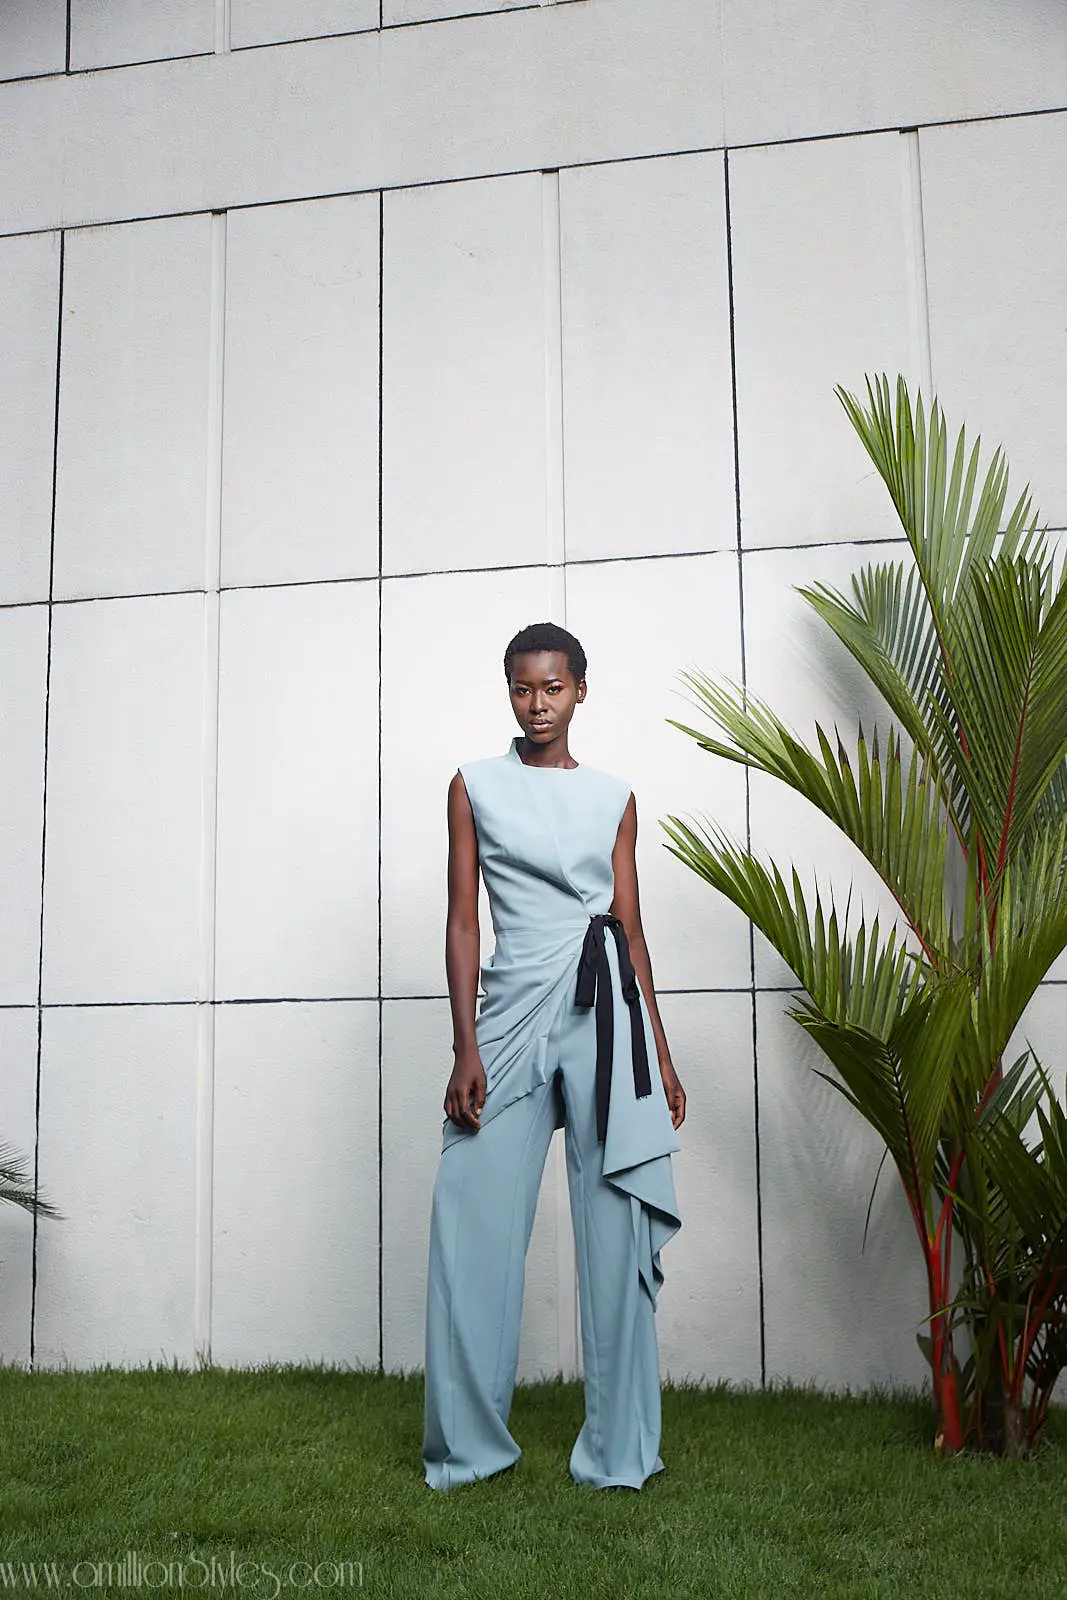 Yutee Rone’s Lotus-Inspired Collection Is A Beauty To Behold